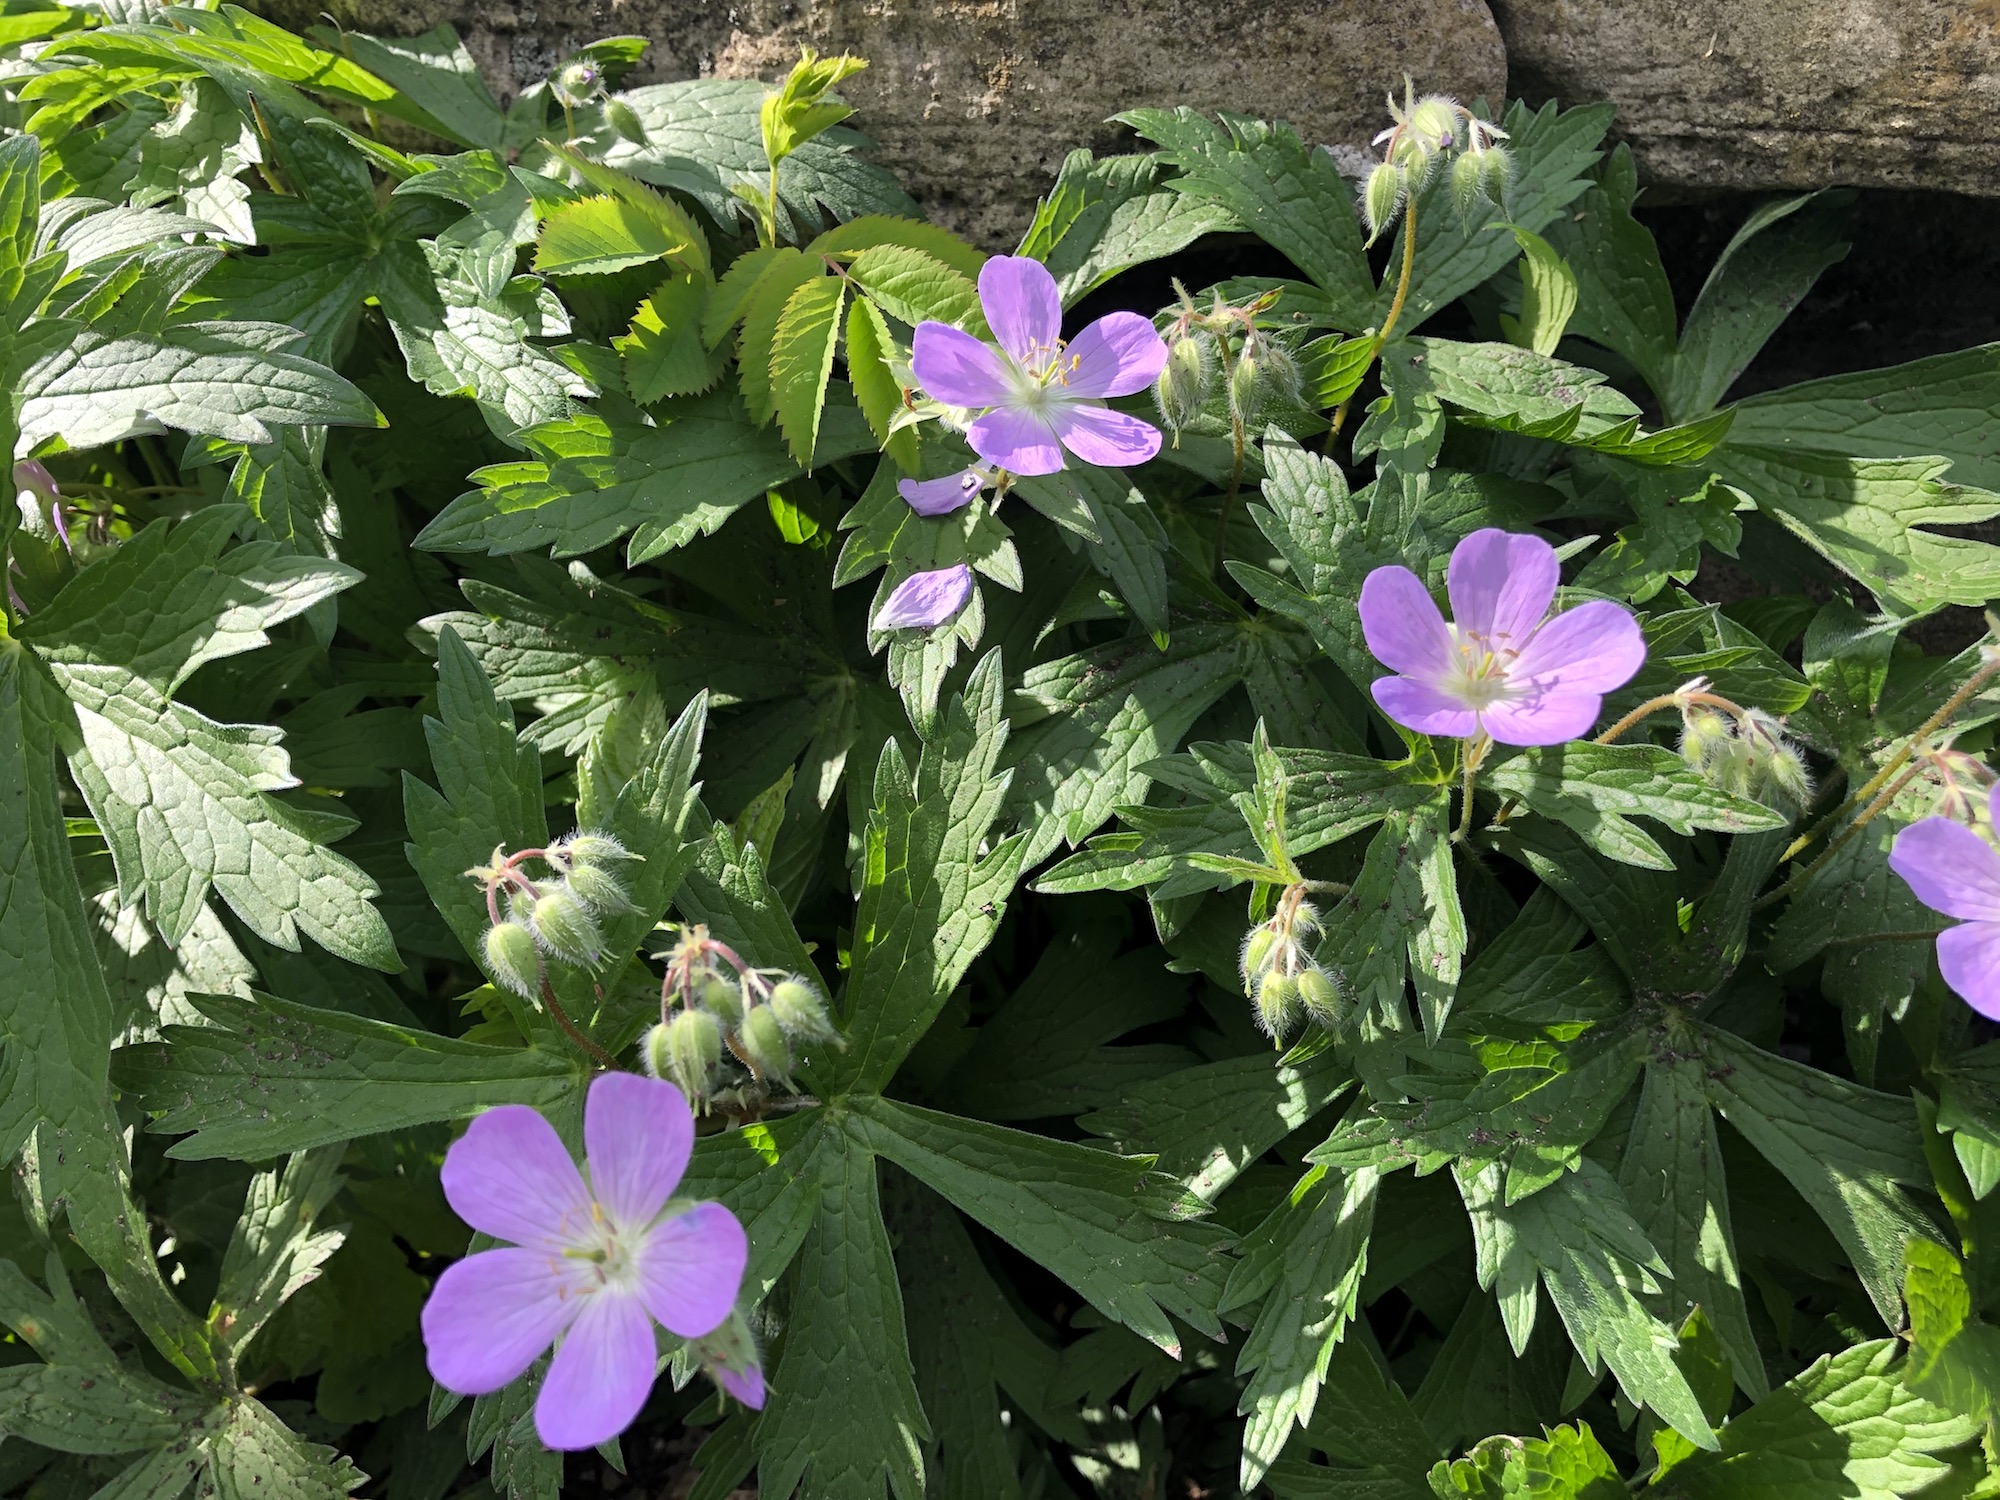 Wild Geranium by Council Ring in Oak Savanna on May 5, 2021.